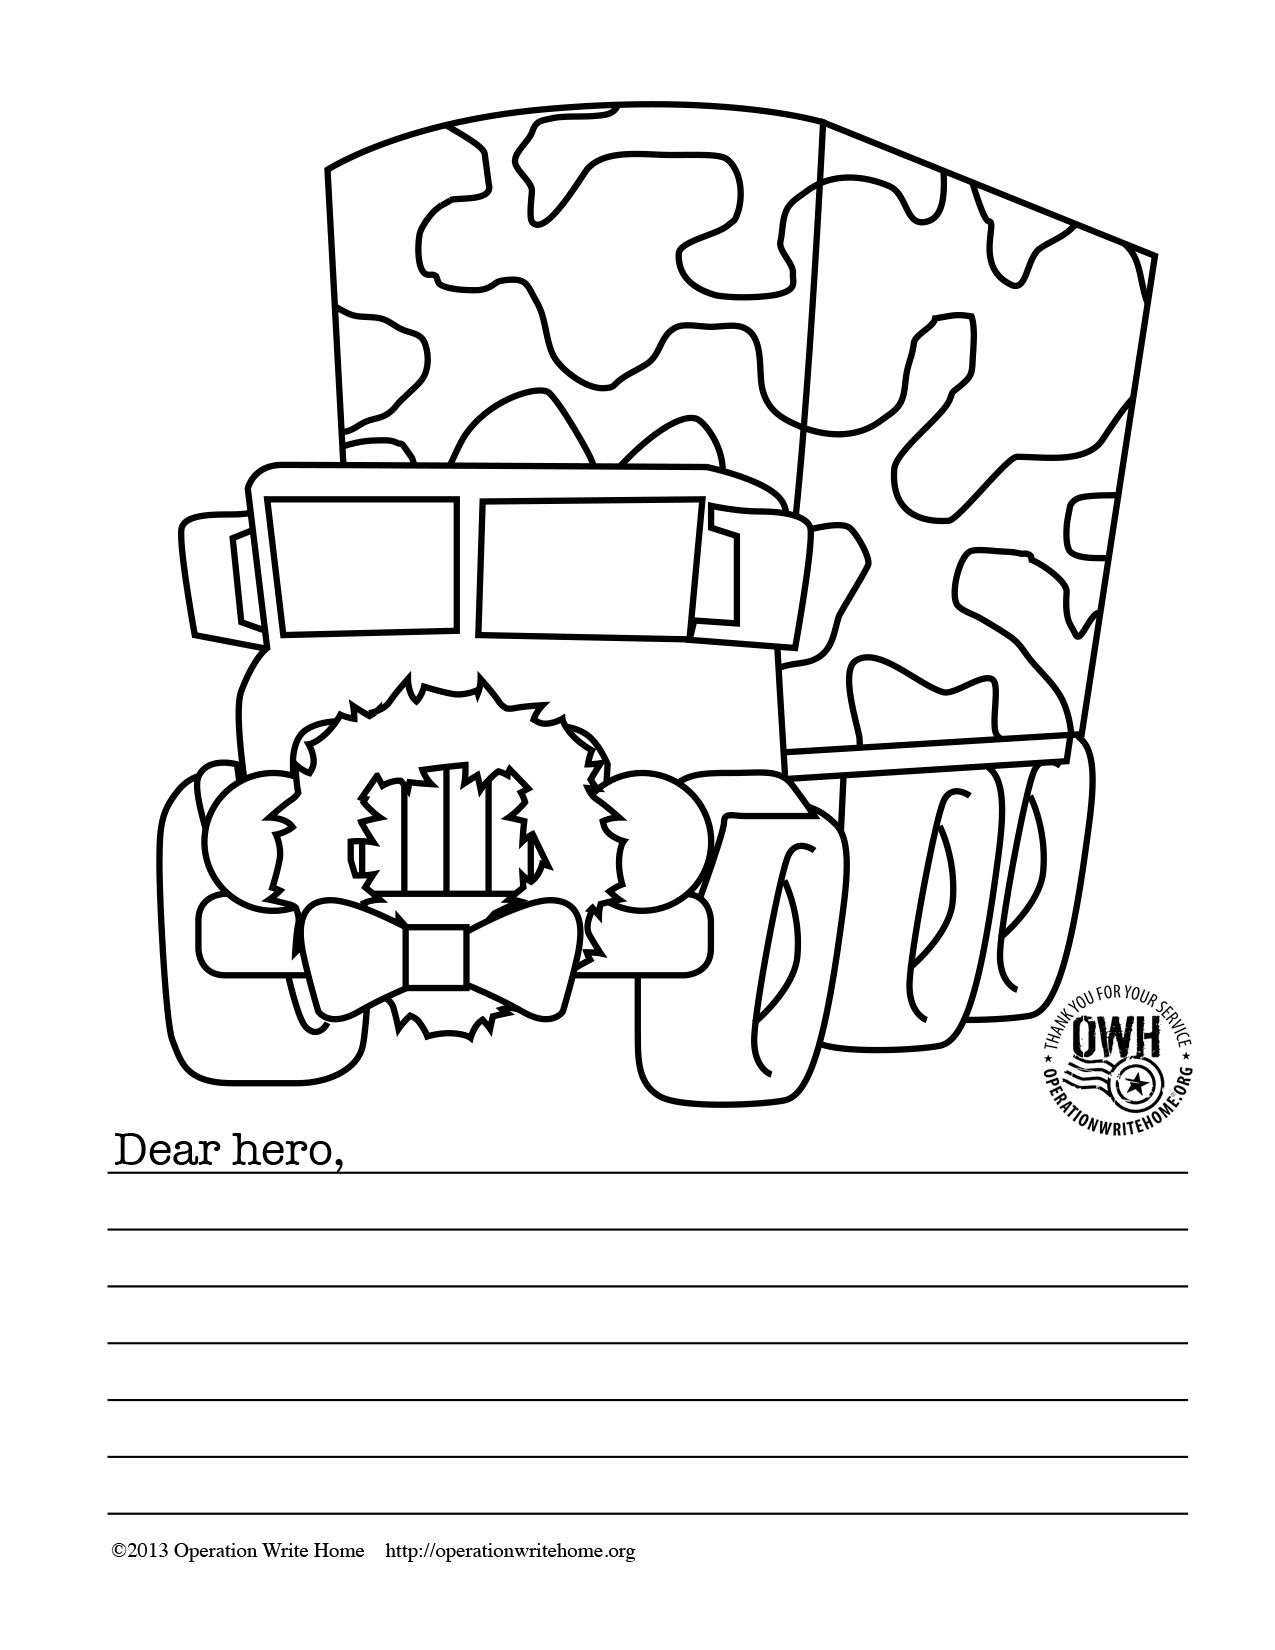 Free Military Coloring Pages For Christmas! | Operation Write Home - Free Printable Christmas Cards To Color